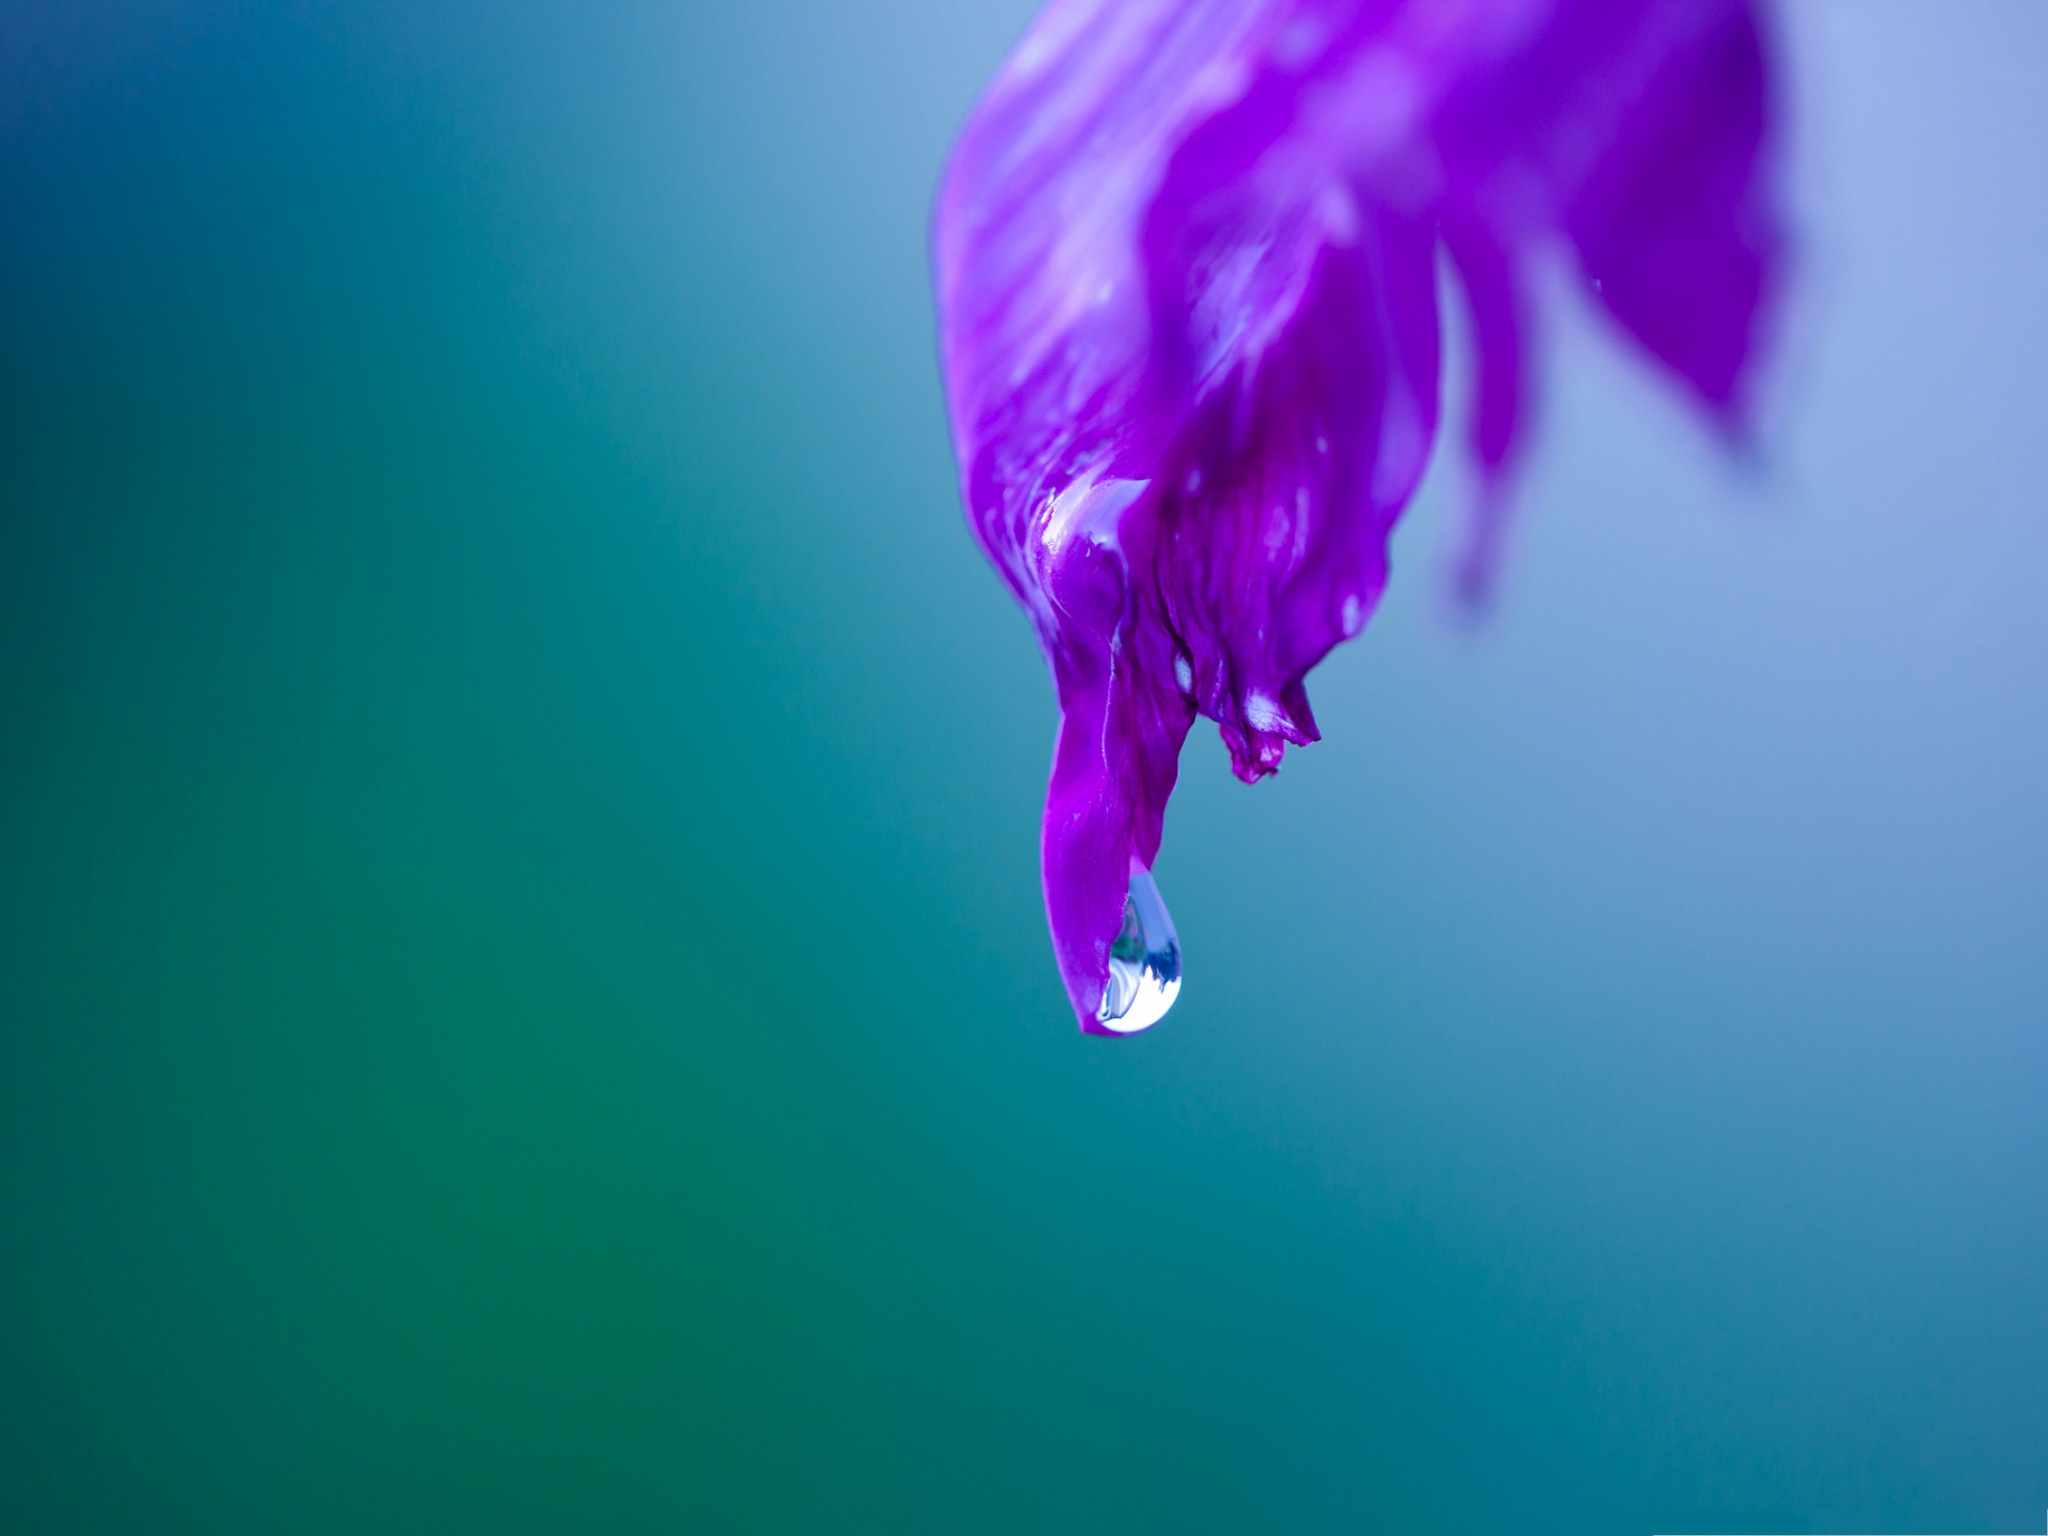 High Quality Wallpapers: Water Drop Focus Images For Desktop, Free ...